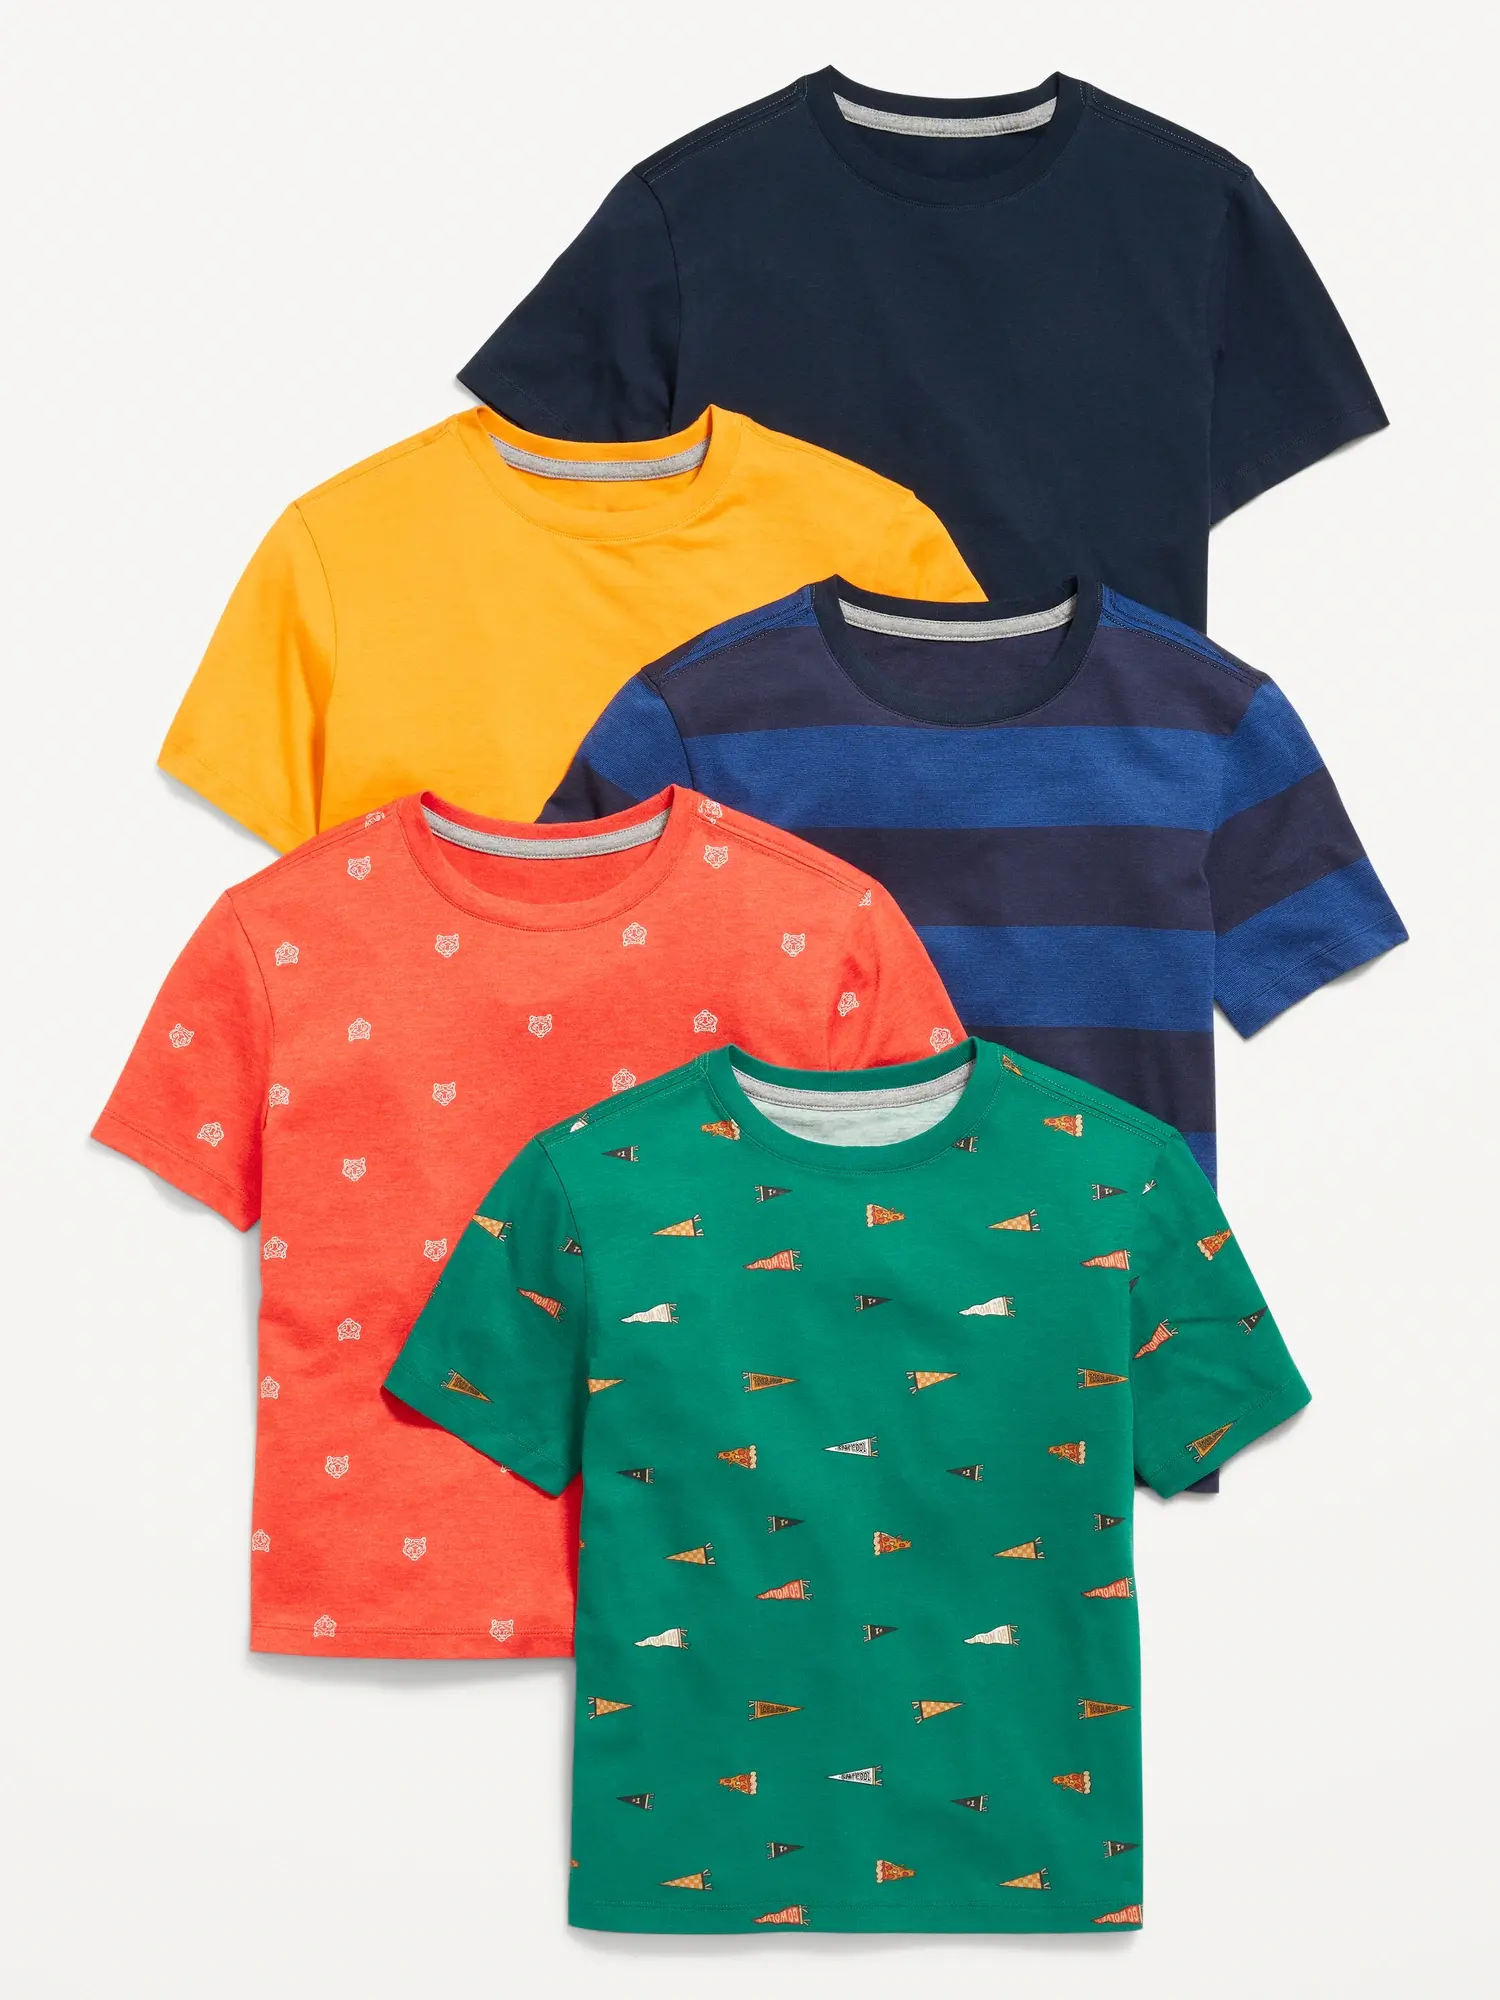 Old Navy Softest Graphic T-Shirt 5-Pack for Boys multi. 1